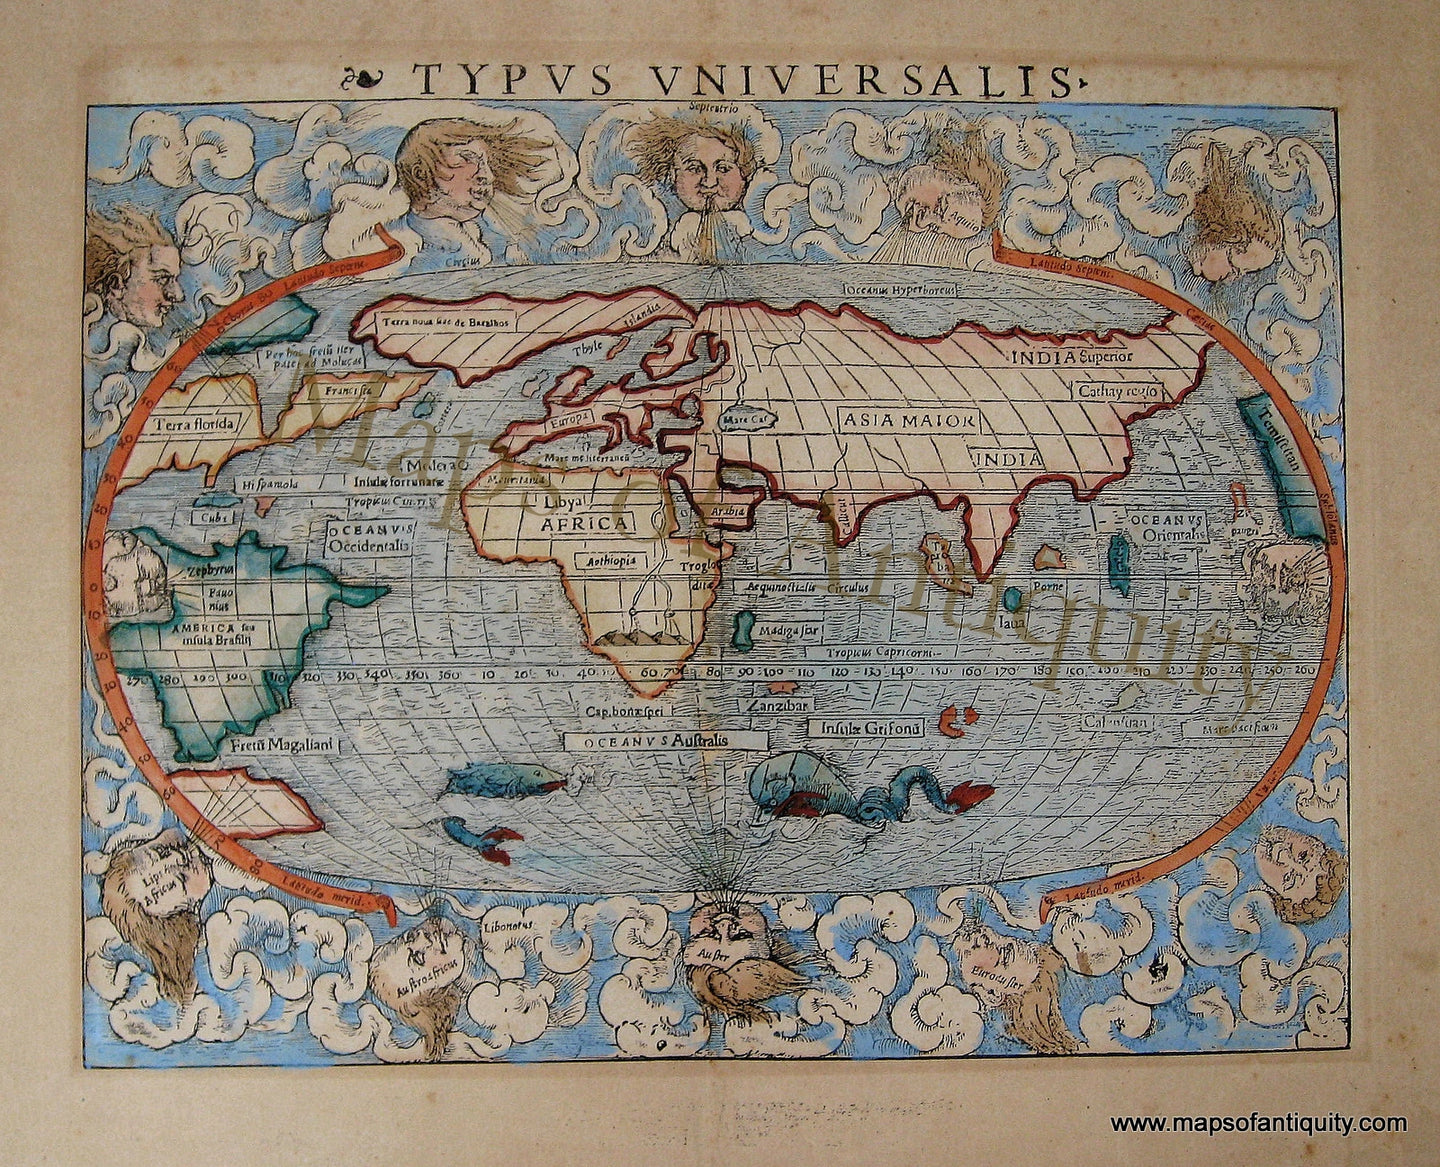 Reproduction-Typus-Universalis---Reproduction-Reproductions-Other-Reproductions-Reproduction-Munster-Maps-Of-Antiquity